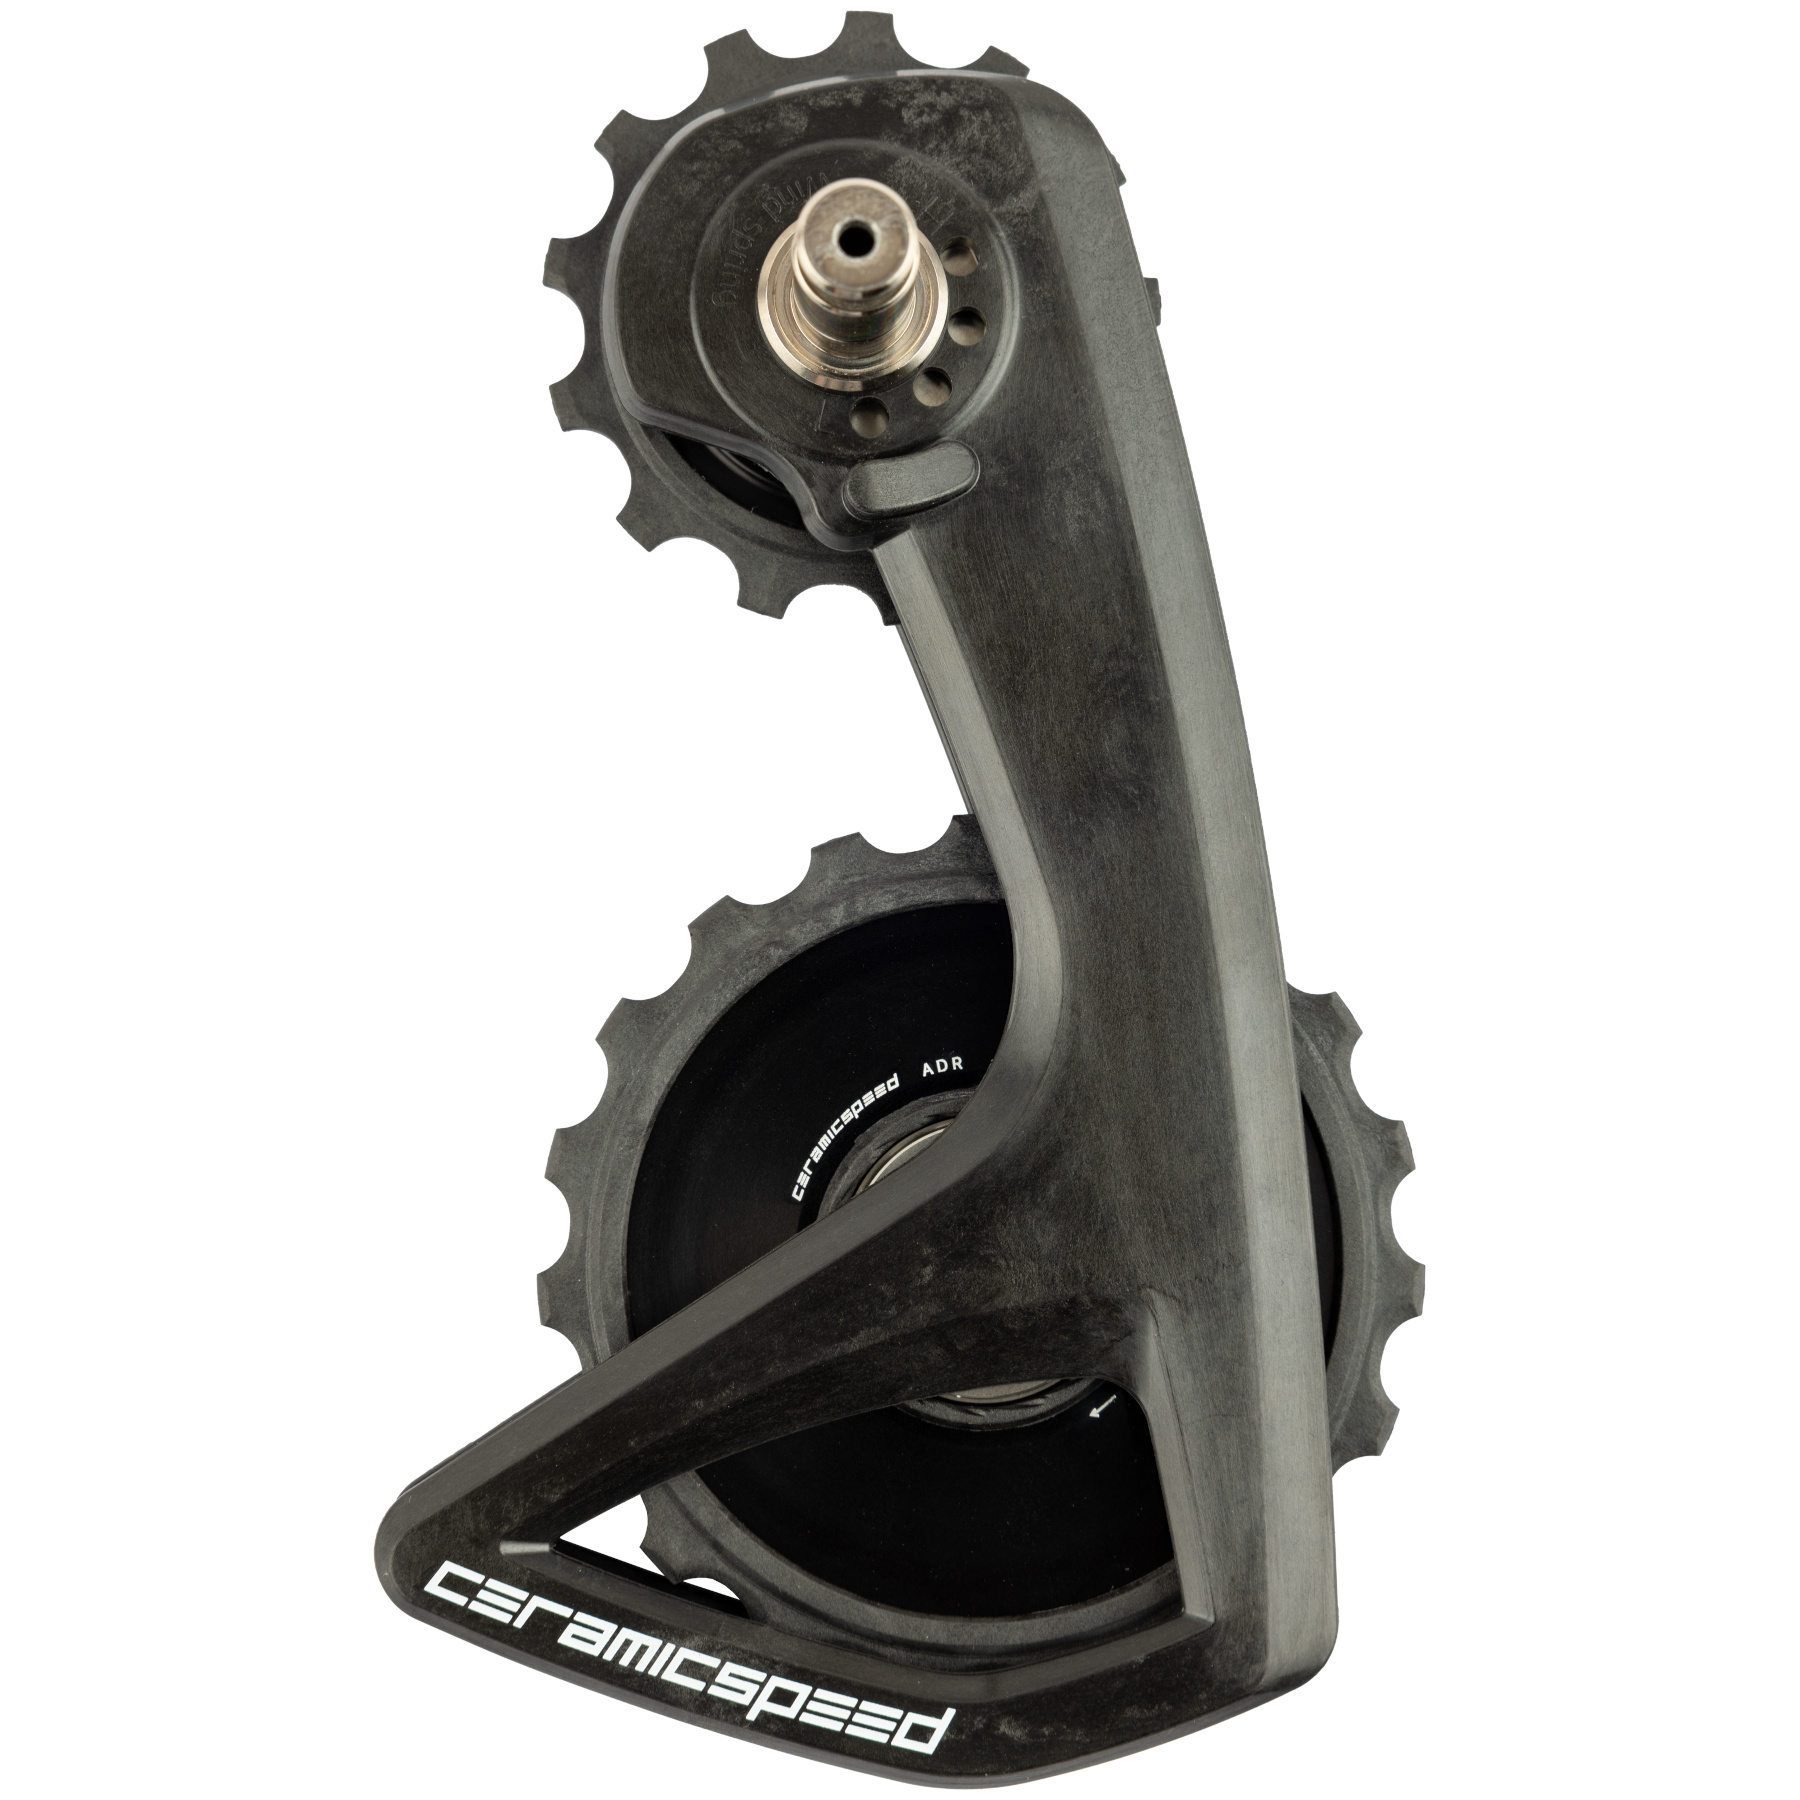 Picture of CeramicSpeed OSPW RS Derailleur Pulley System - Alpha Disc | for Shimano Dura Ace/Ultegra Di2 (R9250/R8150) - black